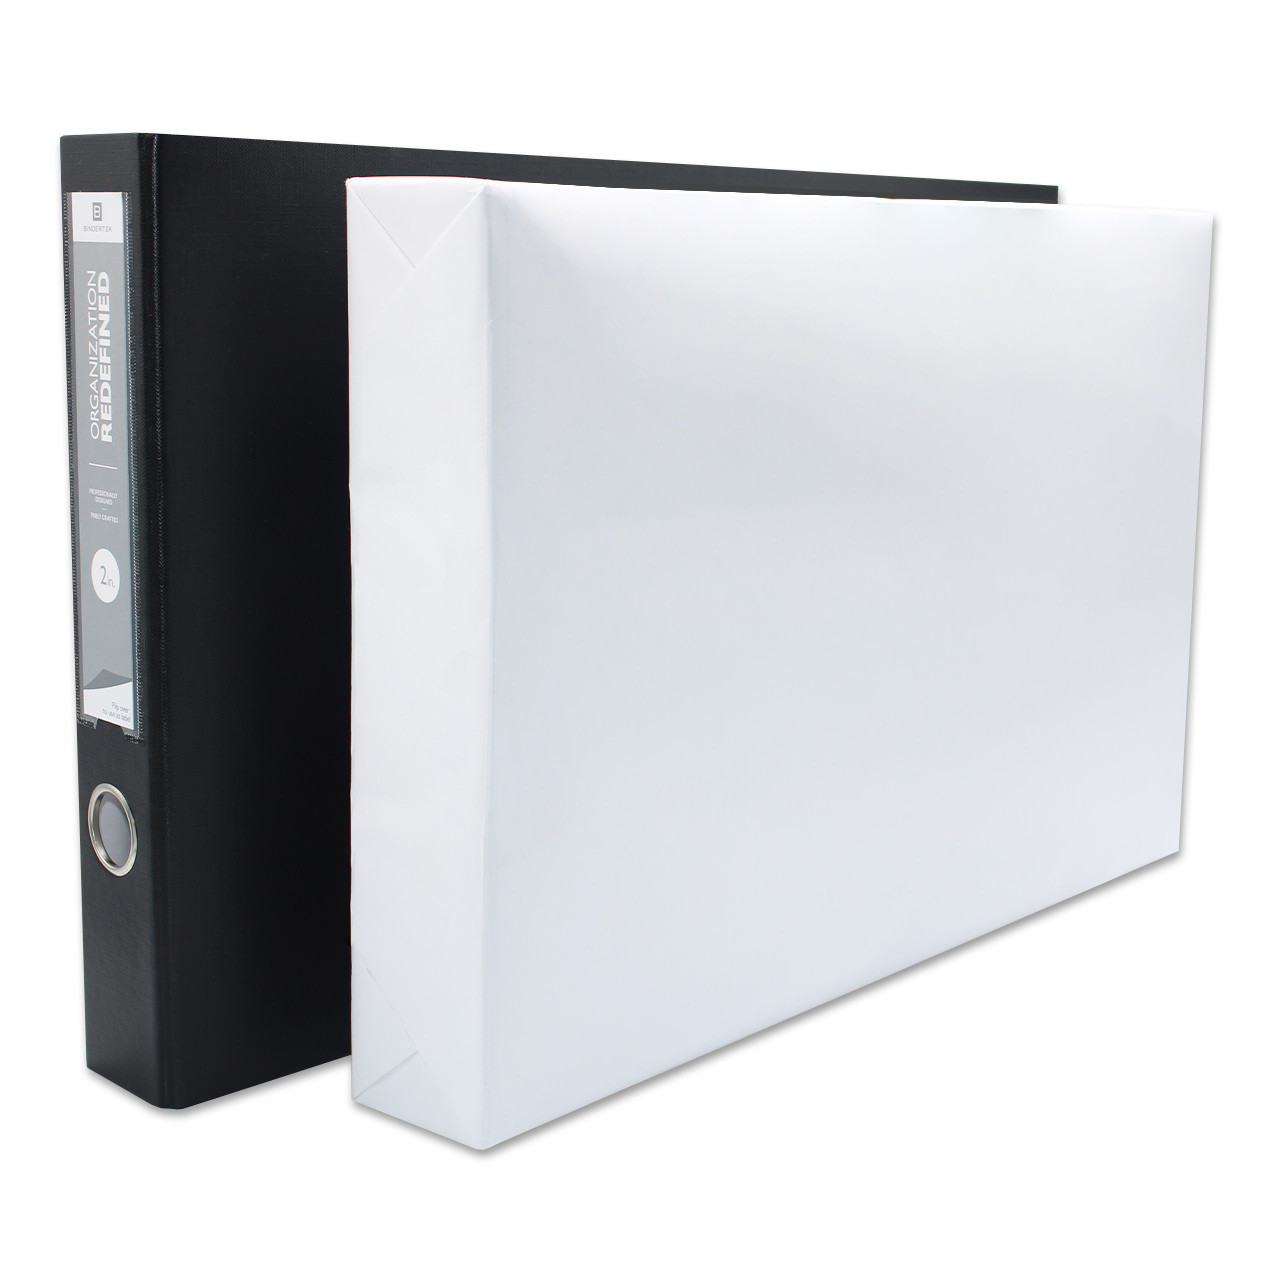 32lb 3 Hole Pre-Punched Binding Paper - 250 Sheets